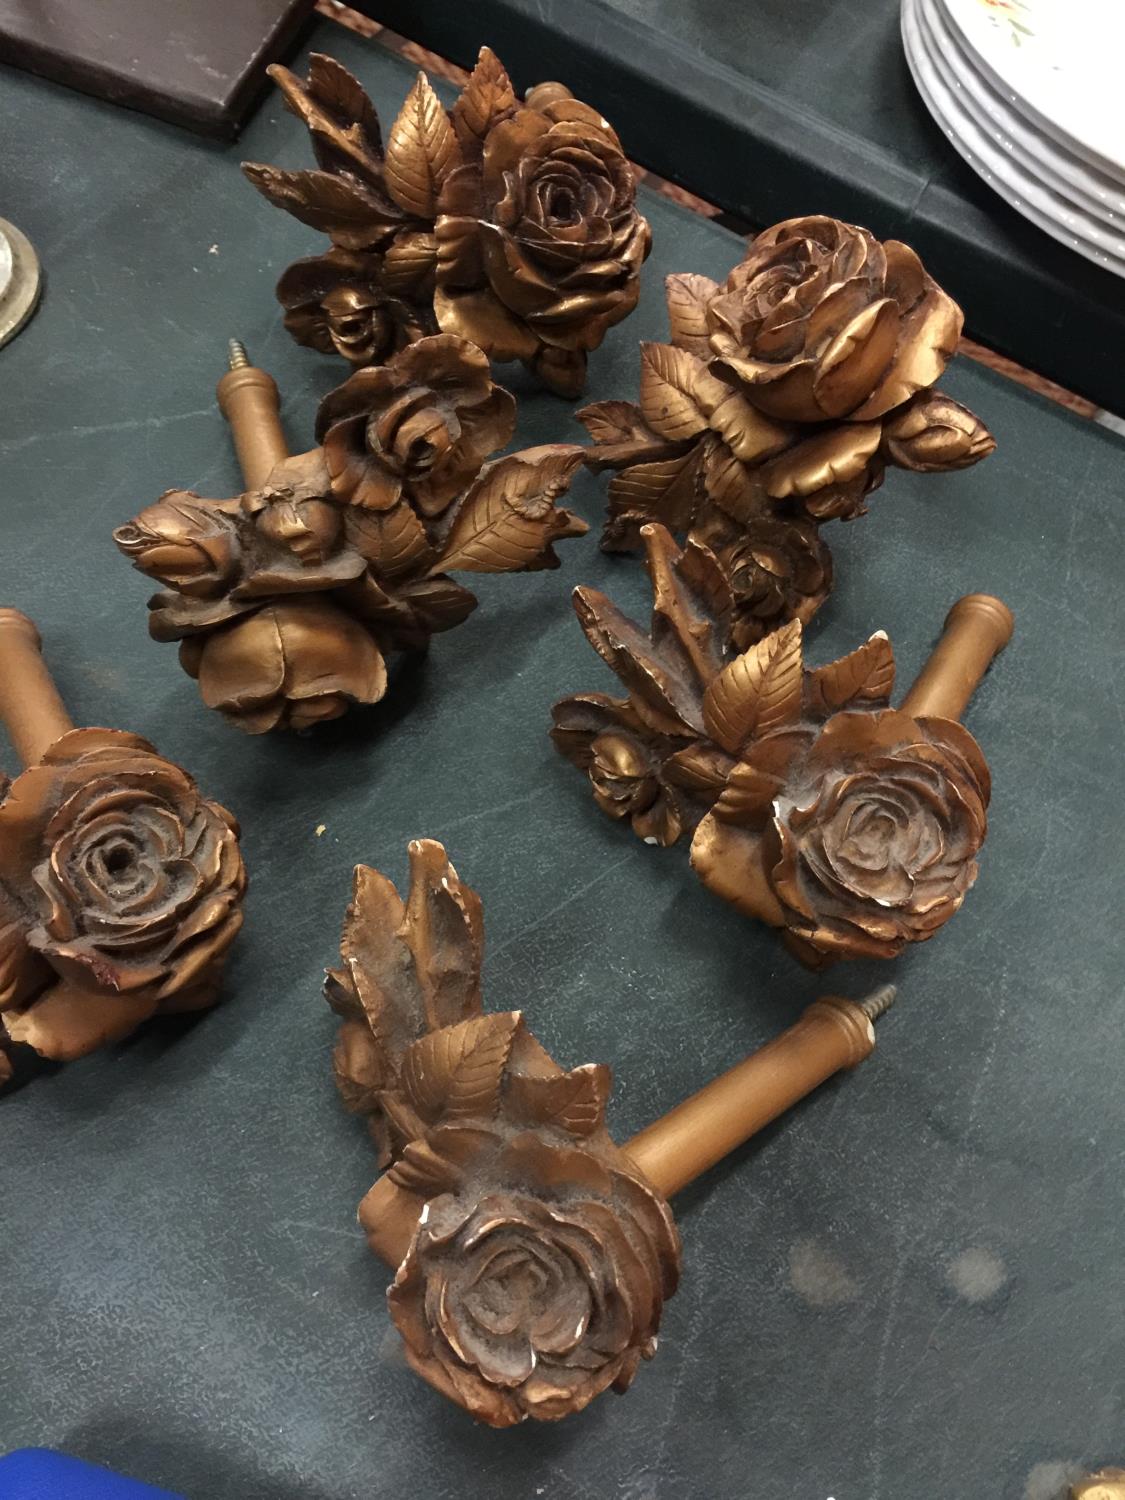 SIX CARVED WOODEN CURTAIN TIE BACKS IN THE SHAPE OF A ROSE - Image 2 of 3